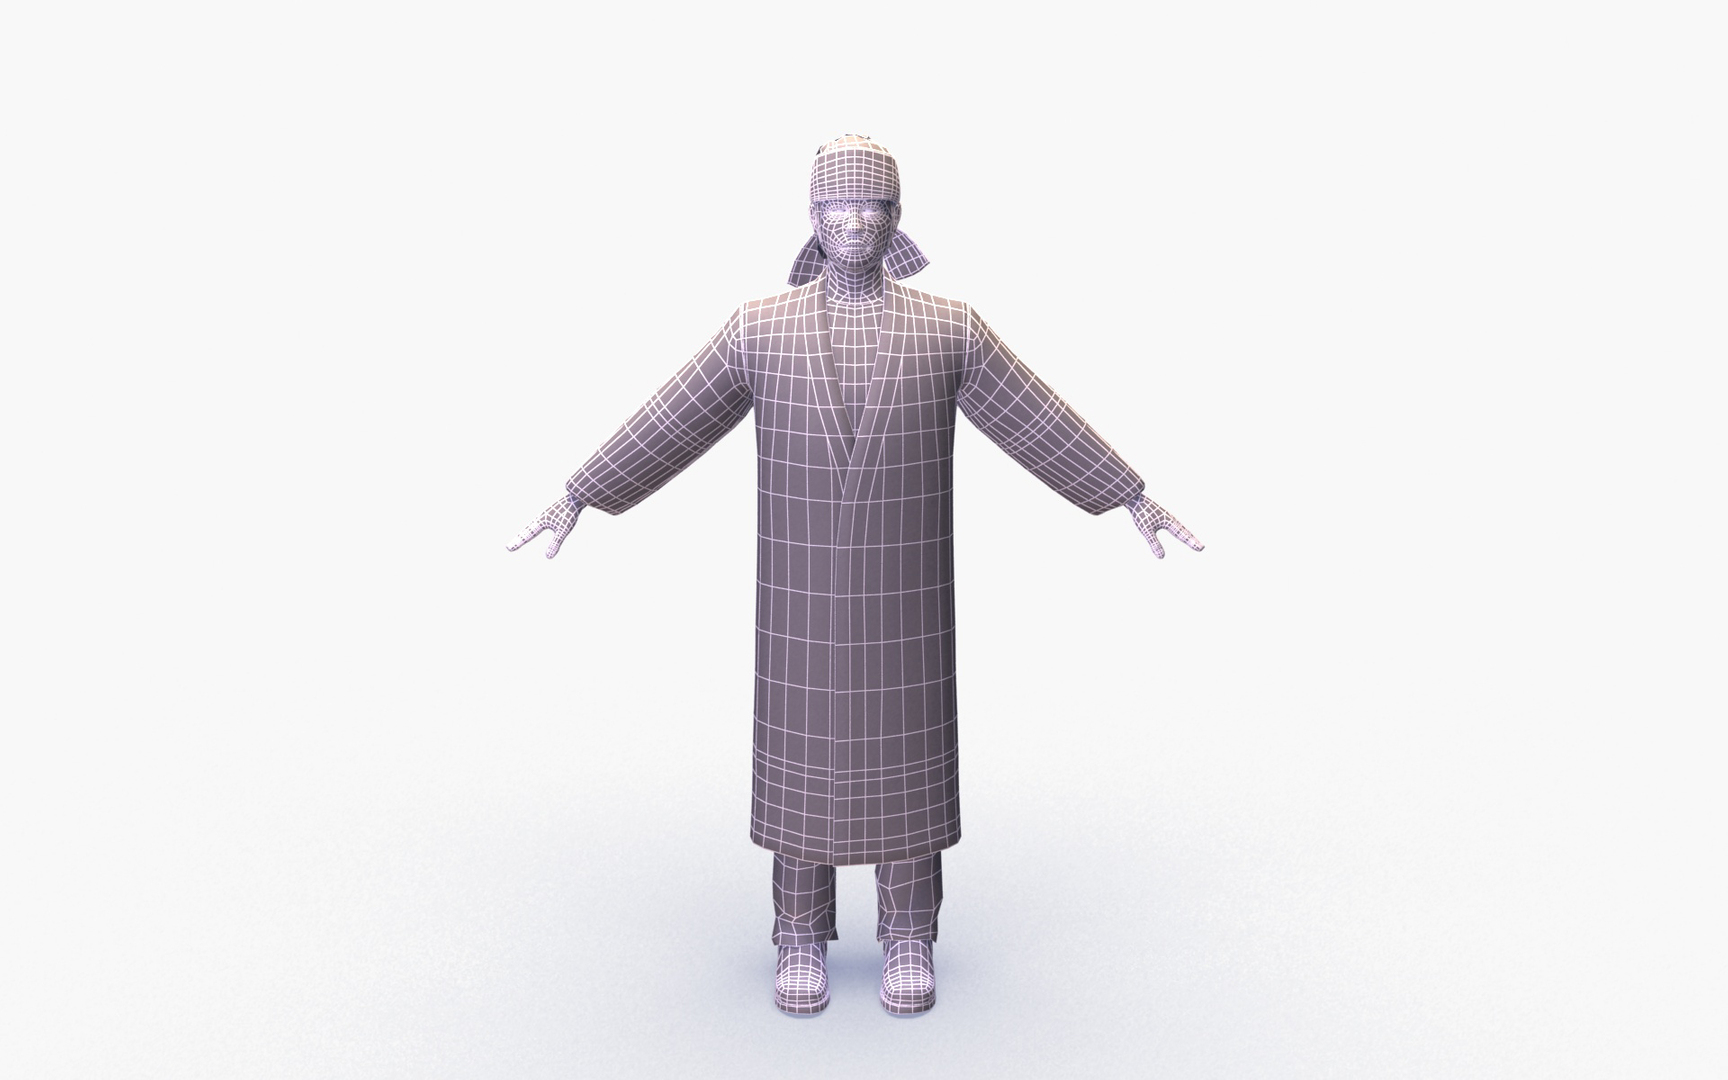 Ainu Fish Skin Robes and 3D Digital Animation for Sustainable